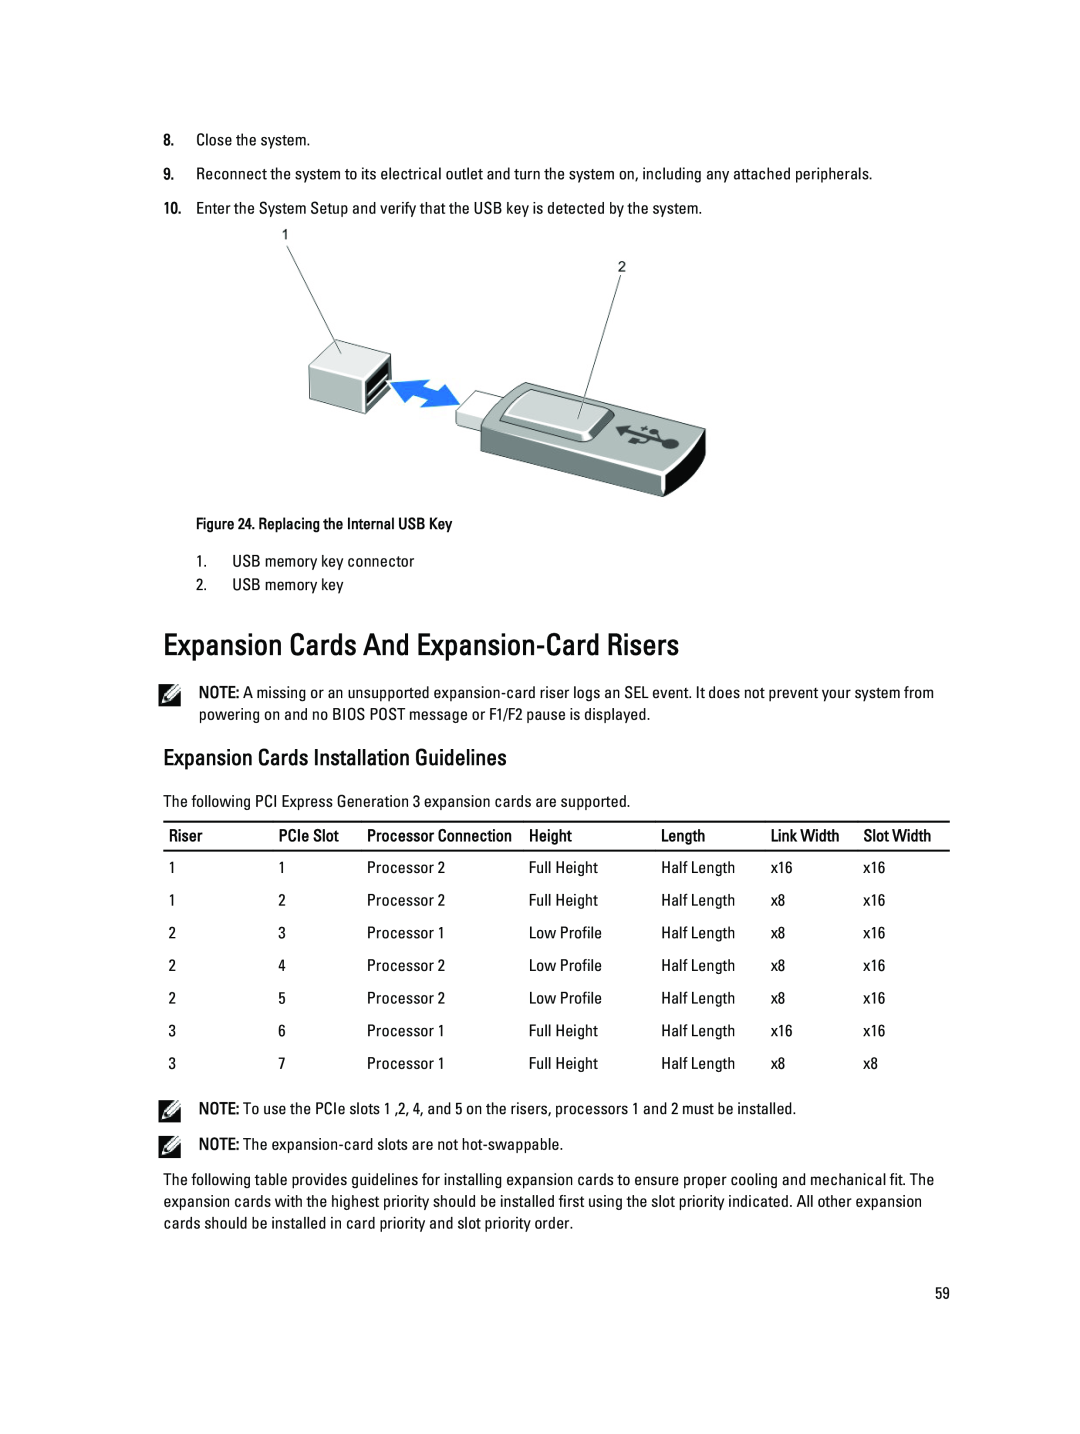 Dell R820 owner manual Expansion Cards And Expansion-Card Risers, Expansion Cards Installation Guidelines 